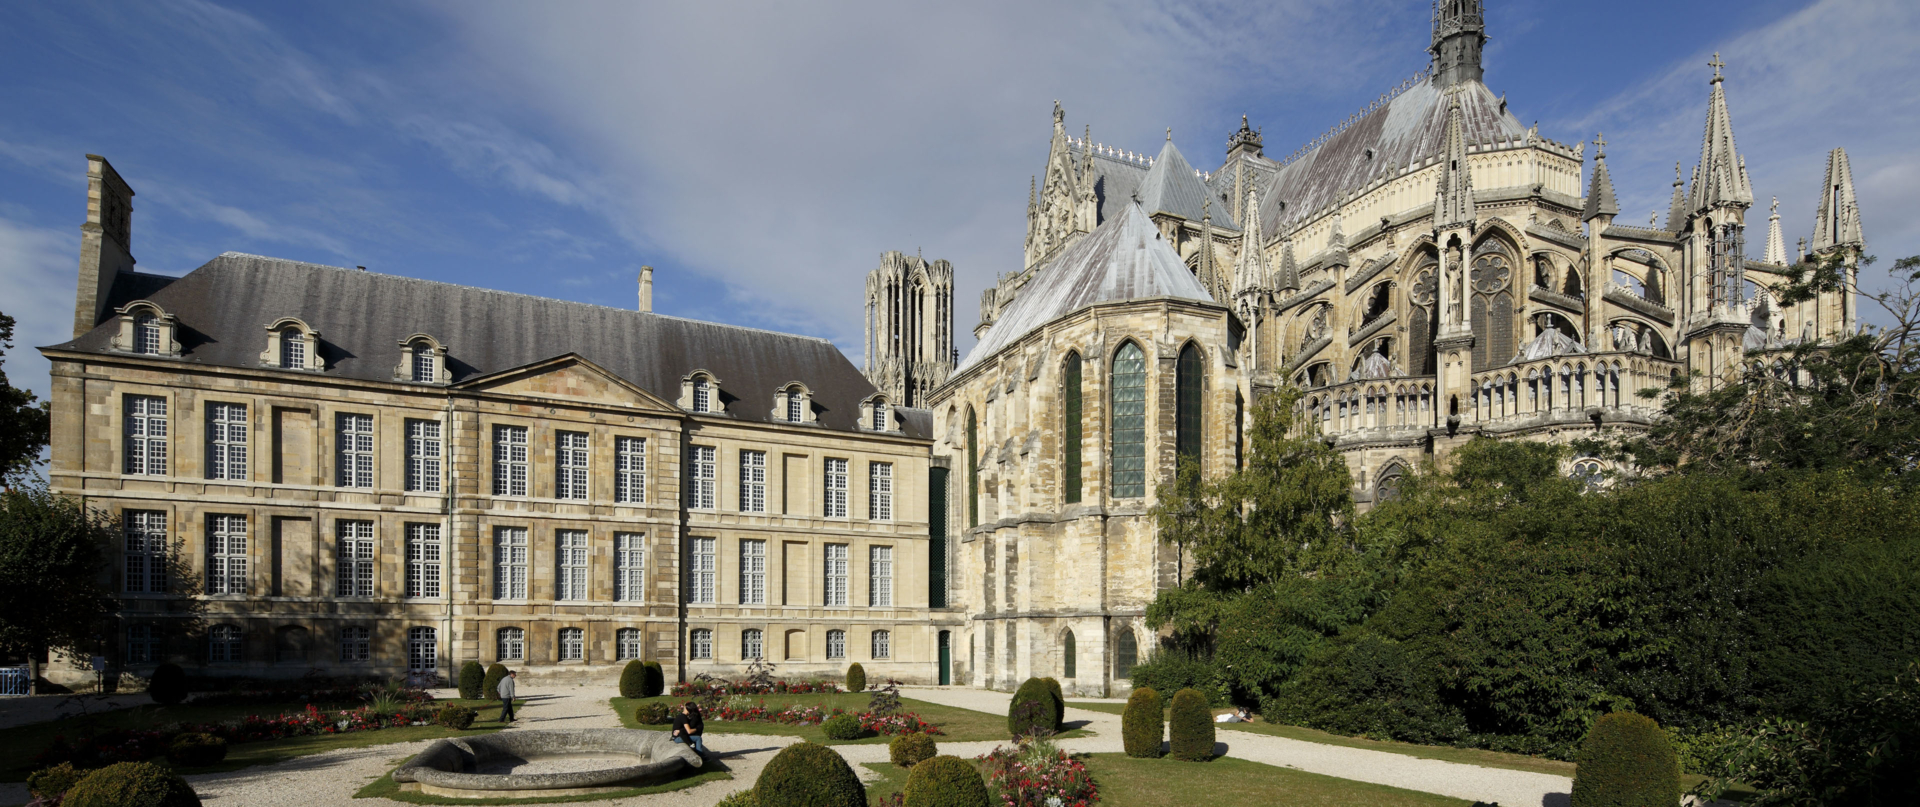 Palais Du Tau - What to see in Reims